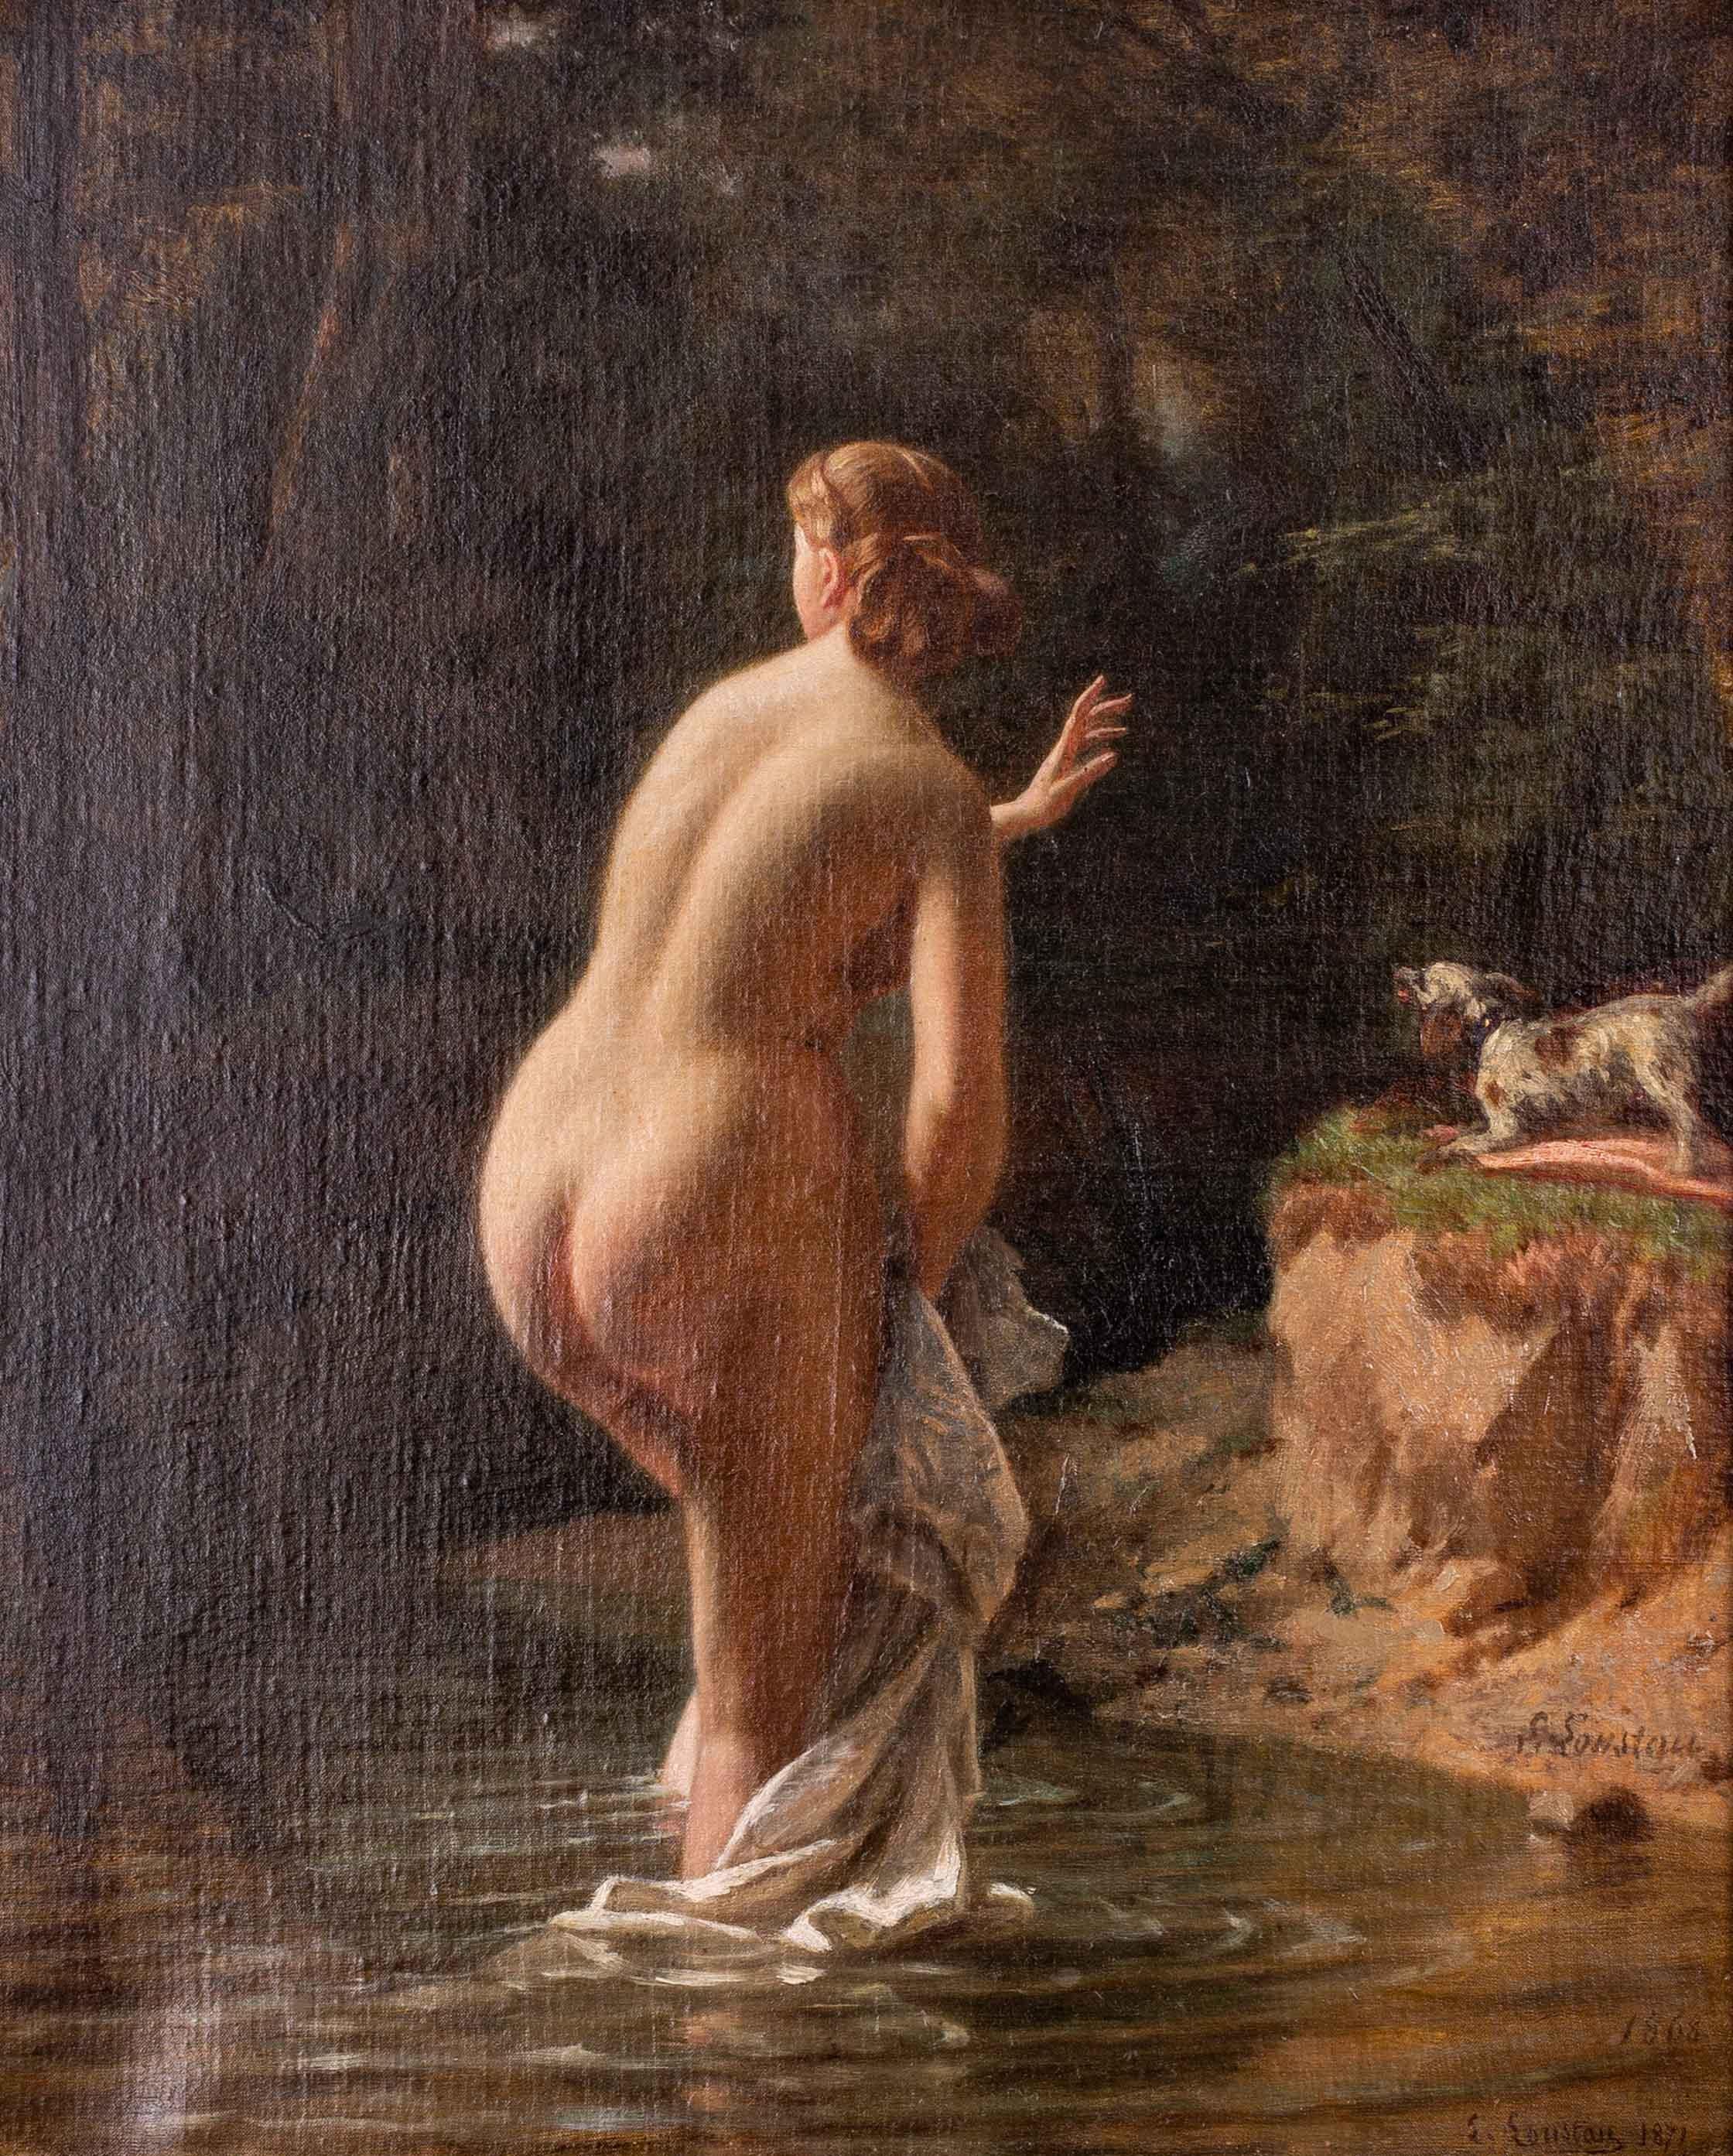 19th Century French oil painting by Loustau 'Homage to the bottom', 1868 - Painting by Jacques J. Leopold Loustau